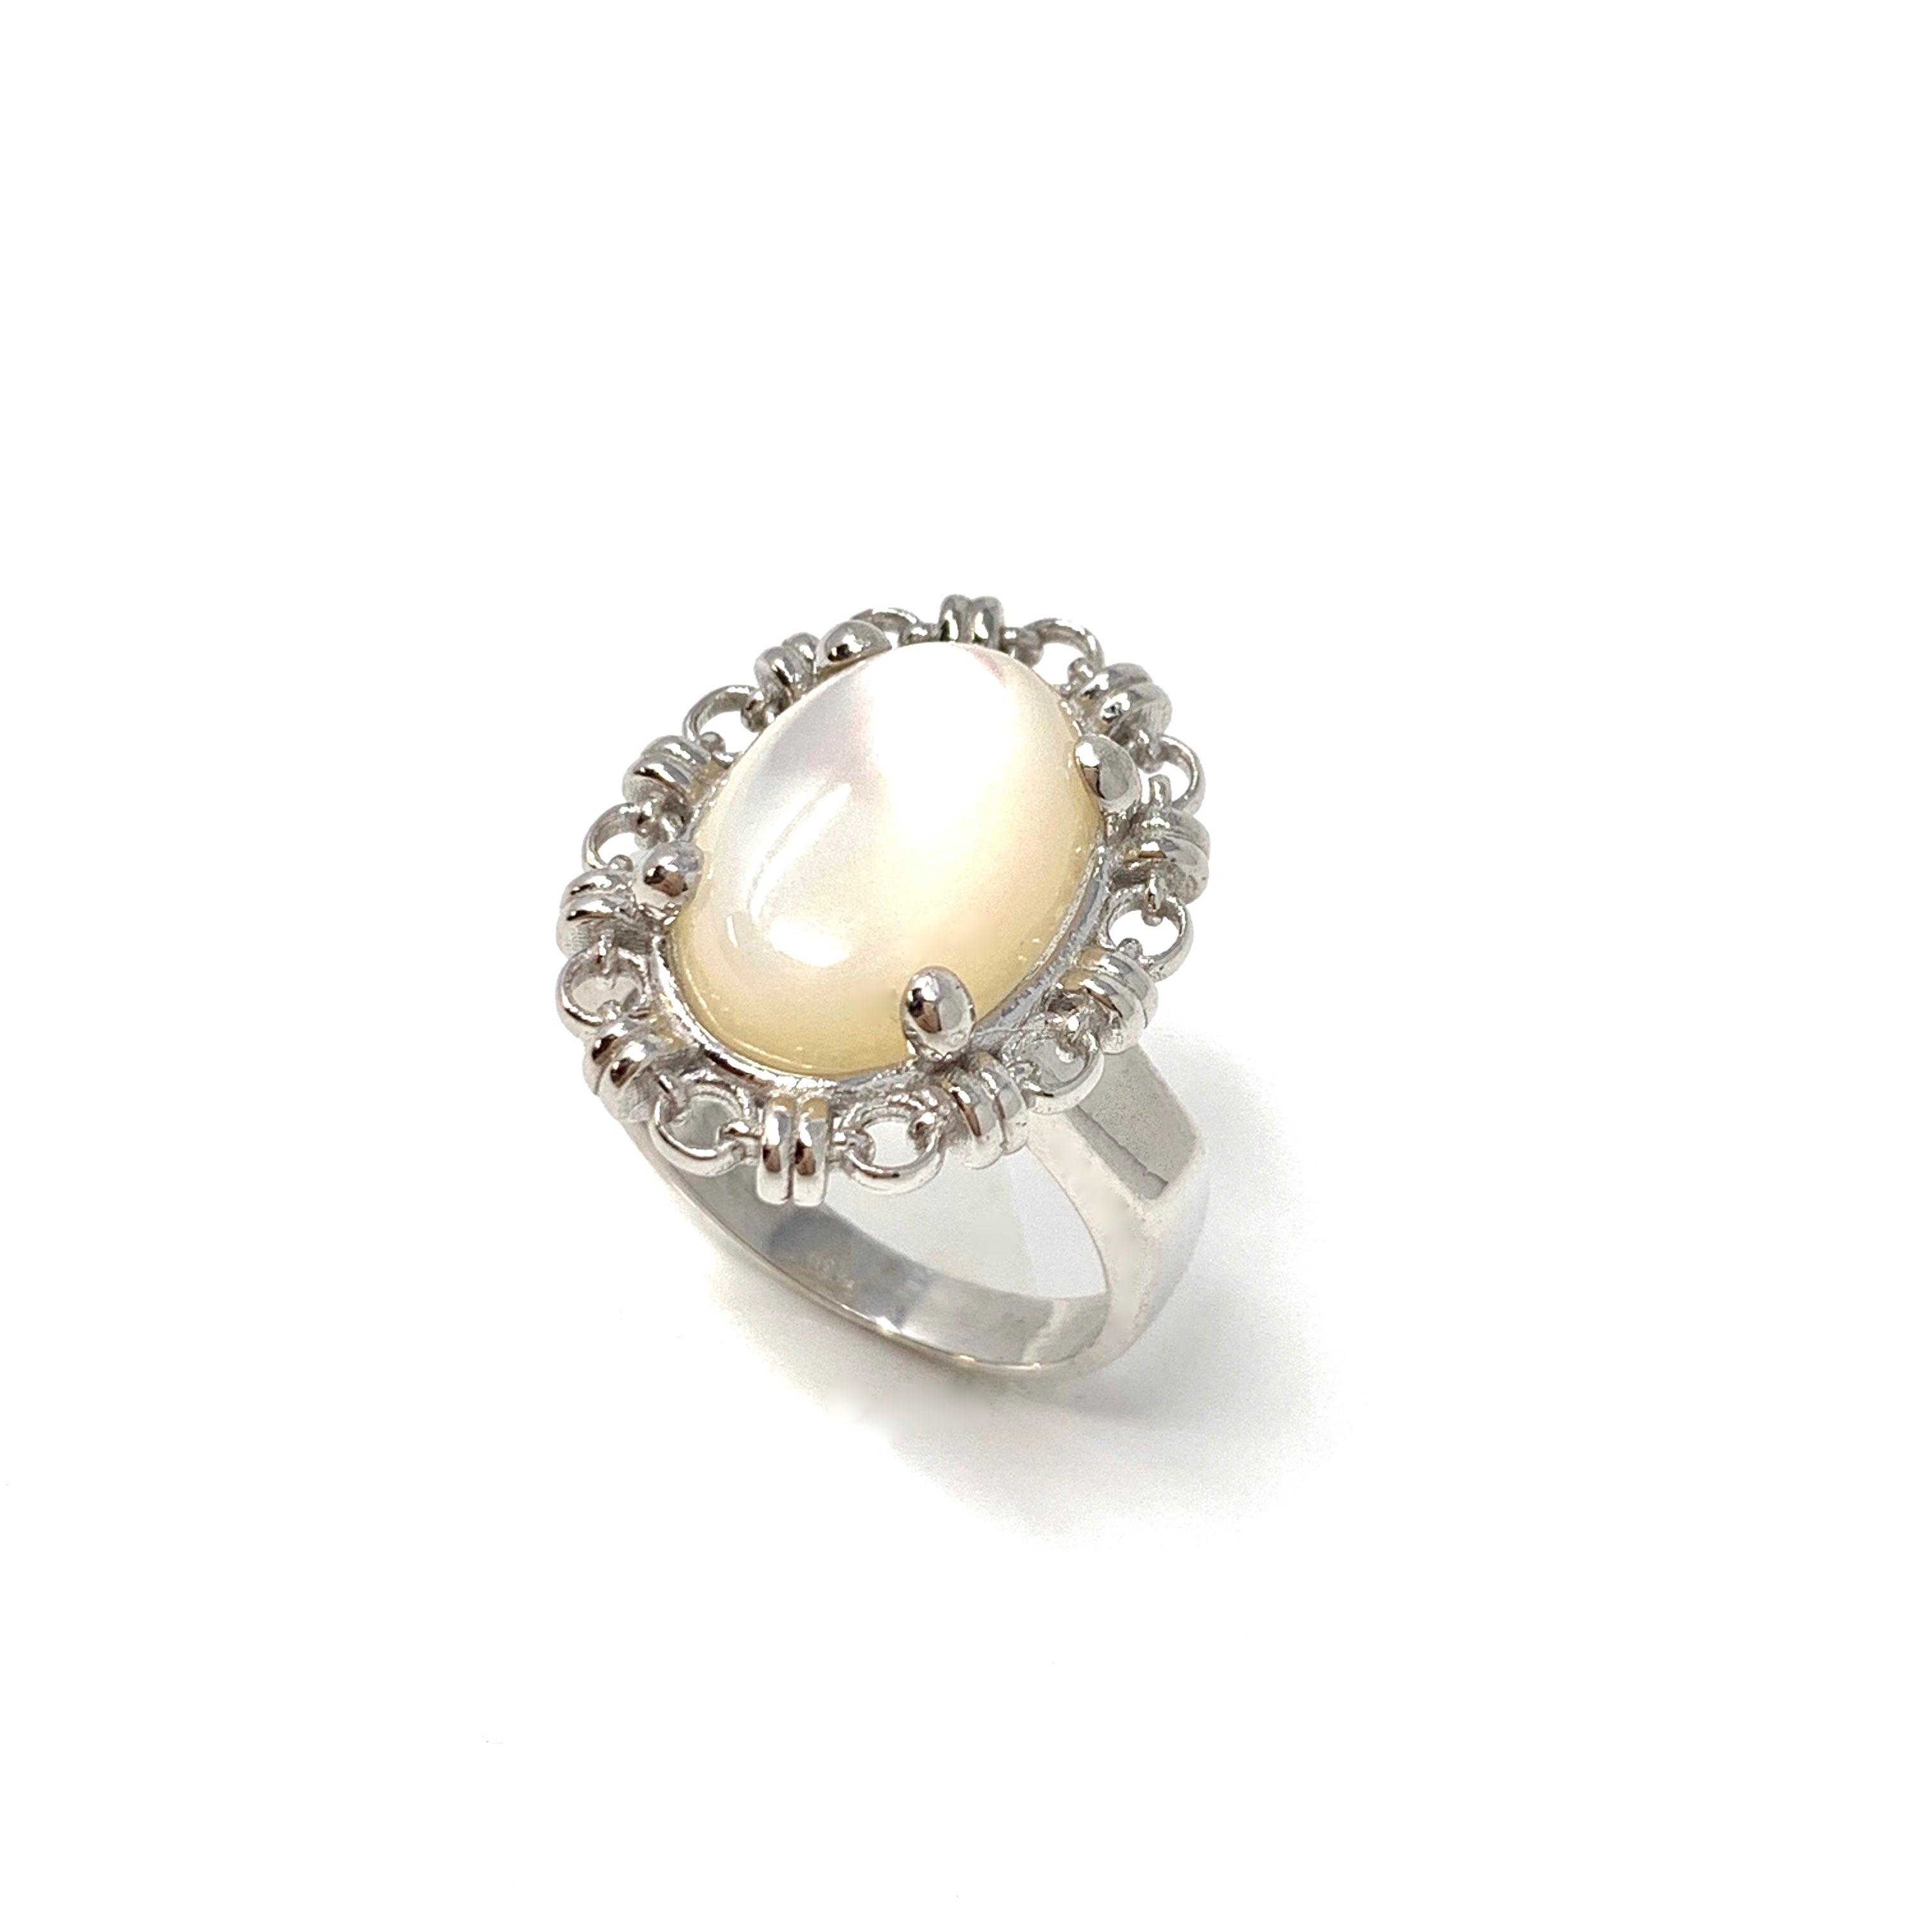 Aperitivo Ring in Silver with Mother of Pearl